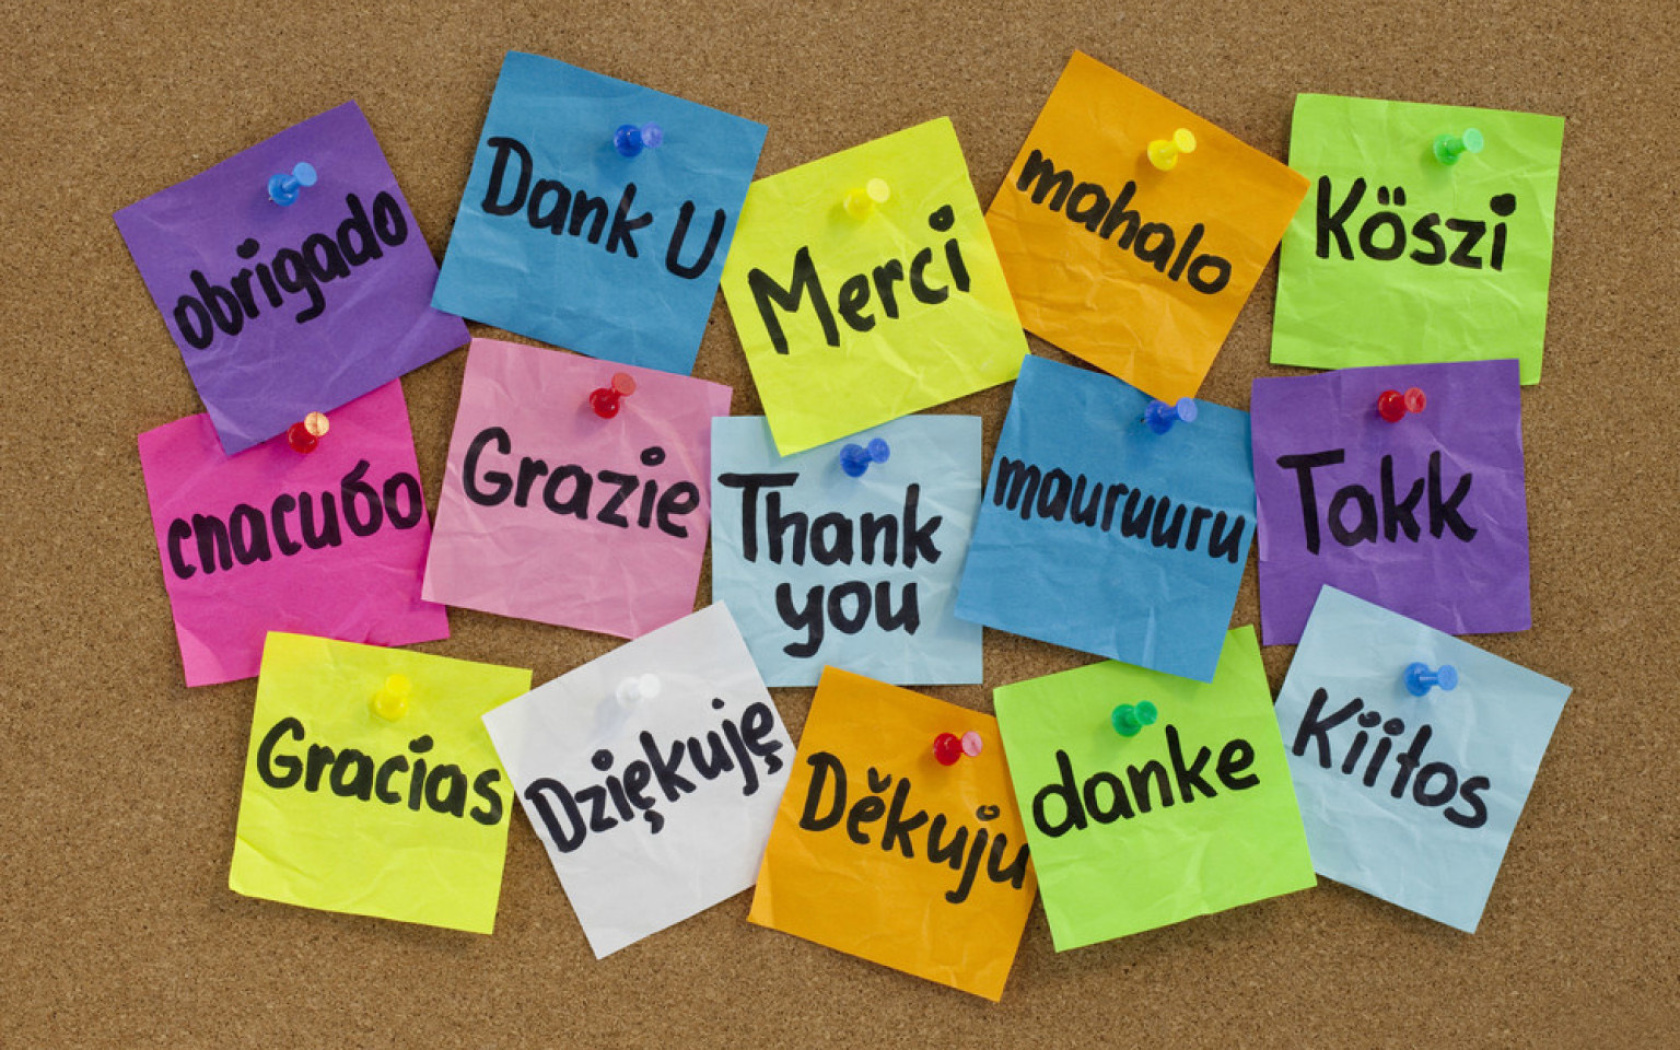 How To Say Thank You in Different Languages screenshot #1 1680x1050